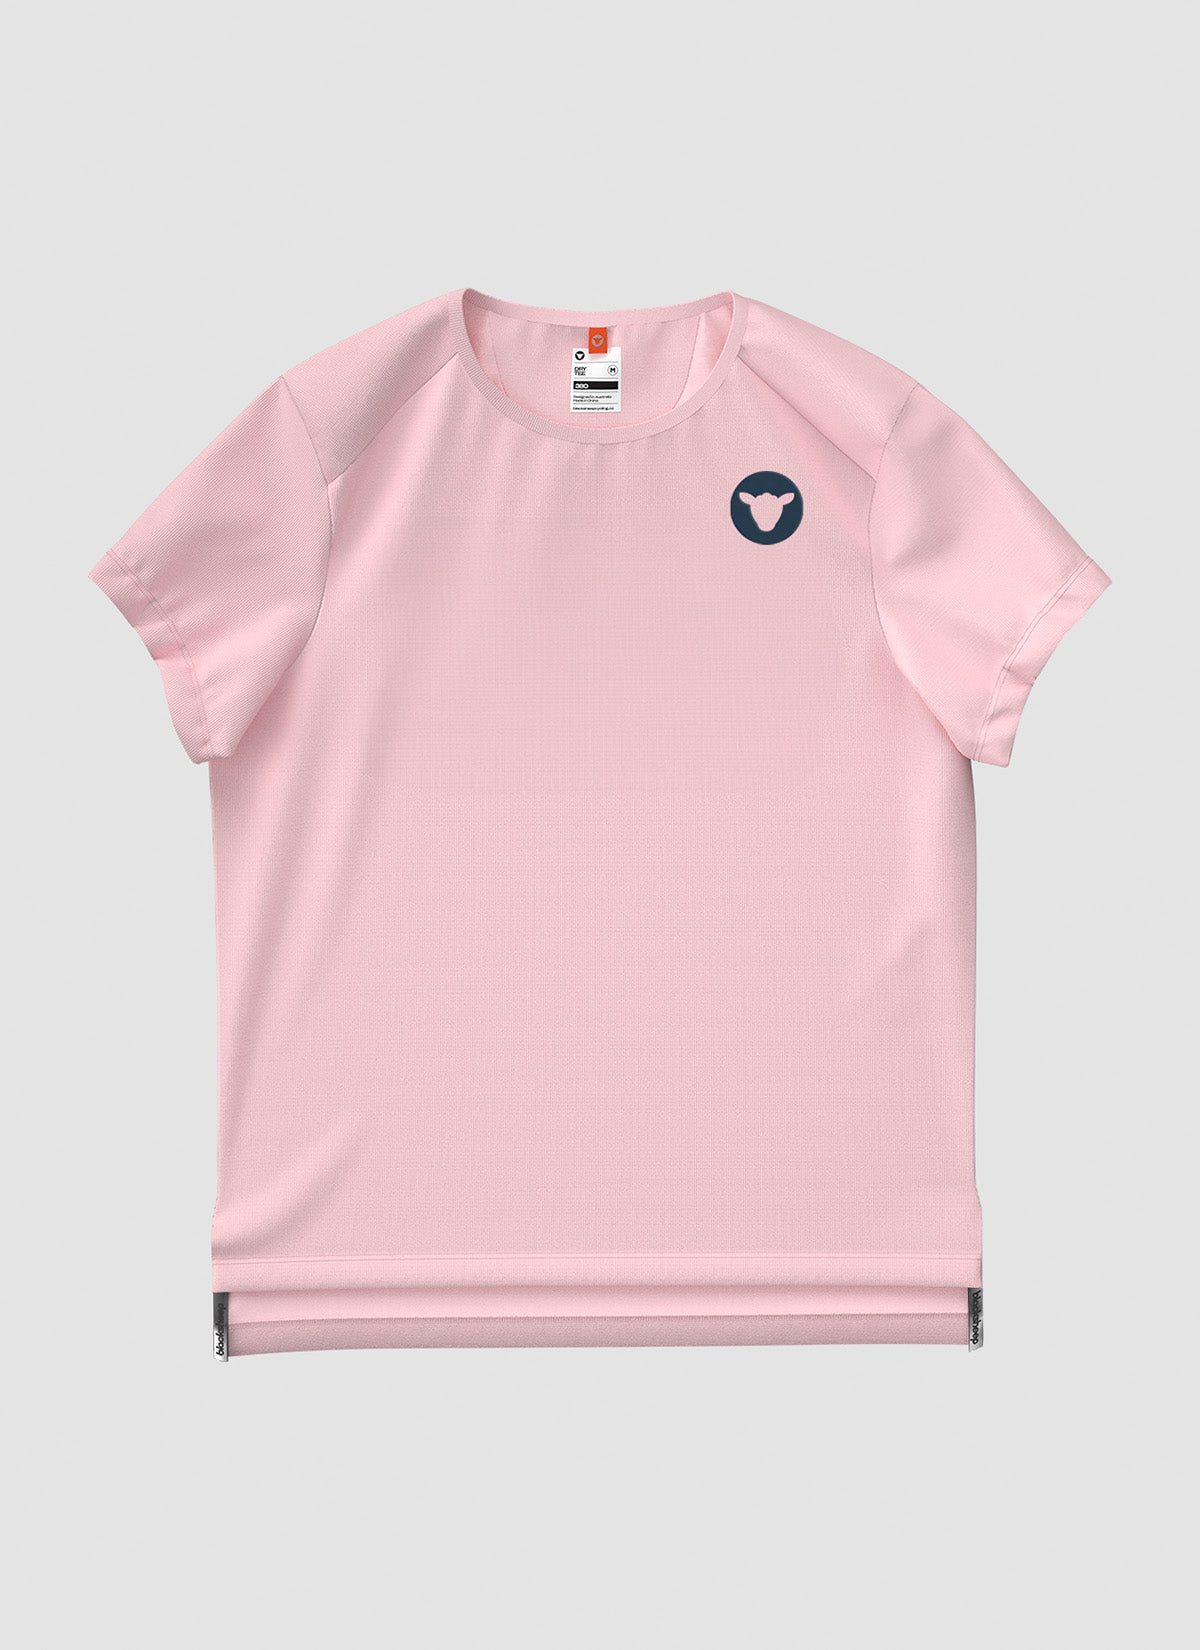 Women's Dry SS Tee - Barely Pink